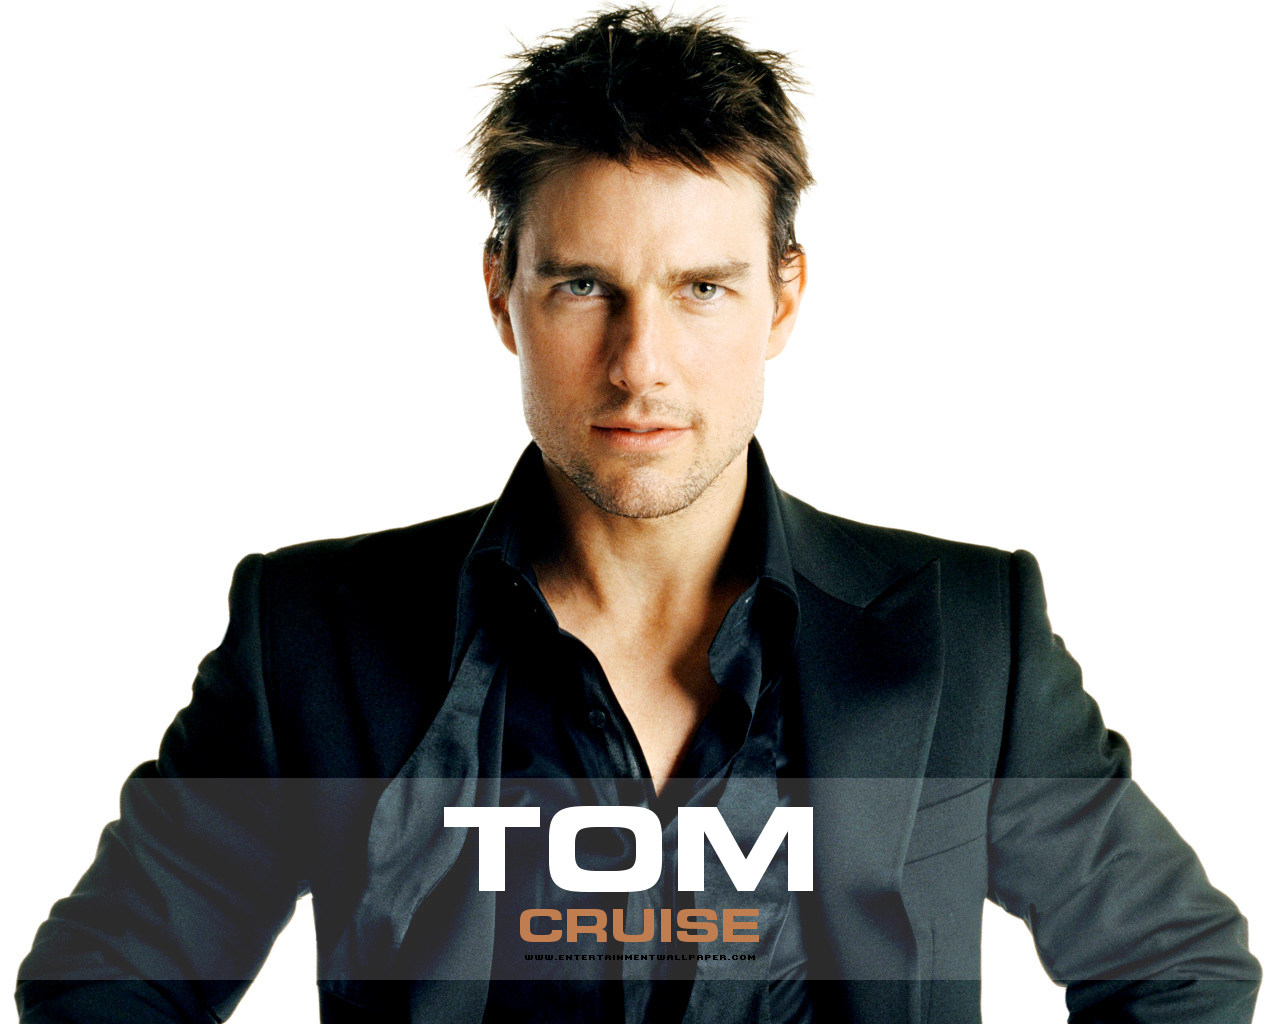 Tom Cruise Ten Richest Actors in Hollywood…. Maybe